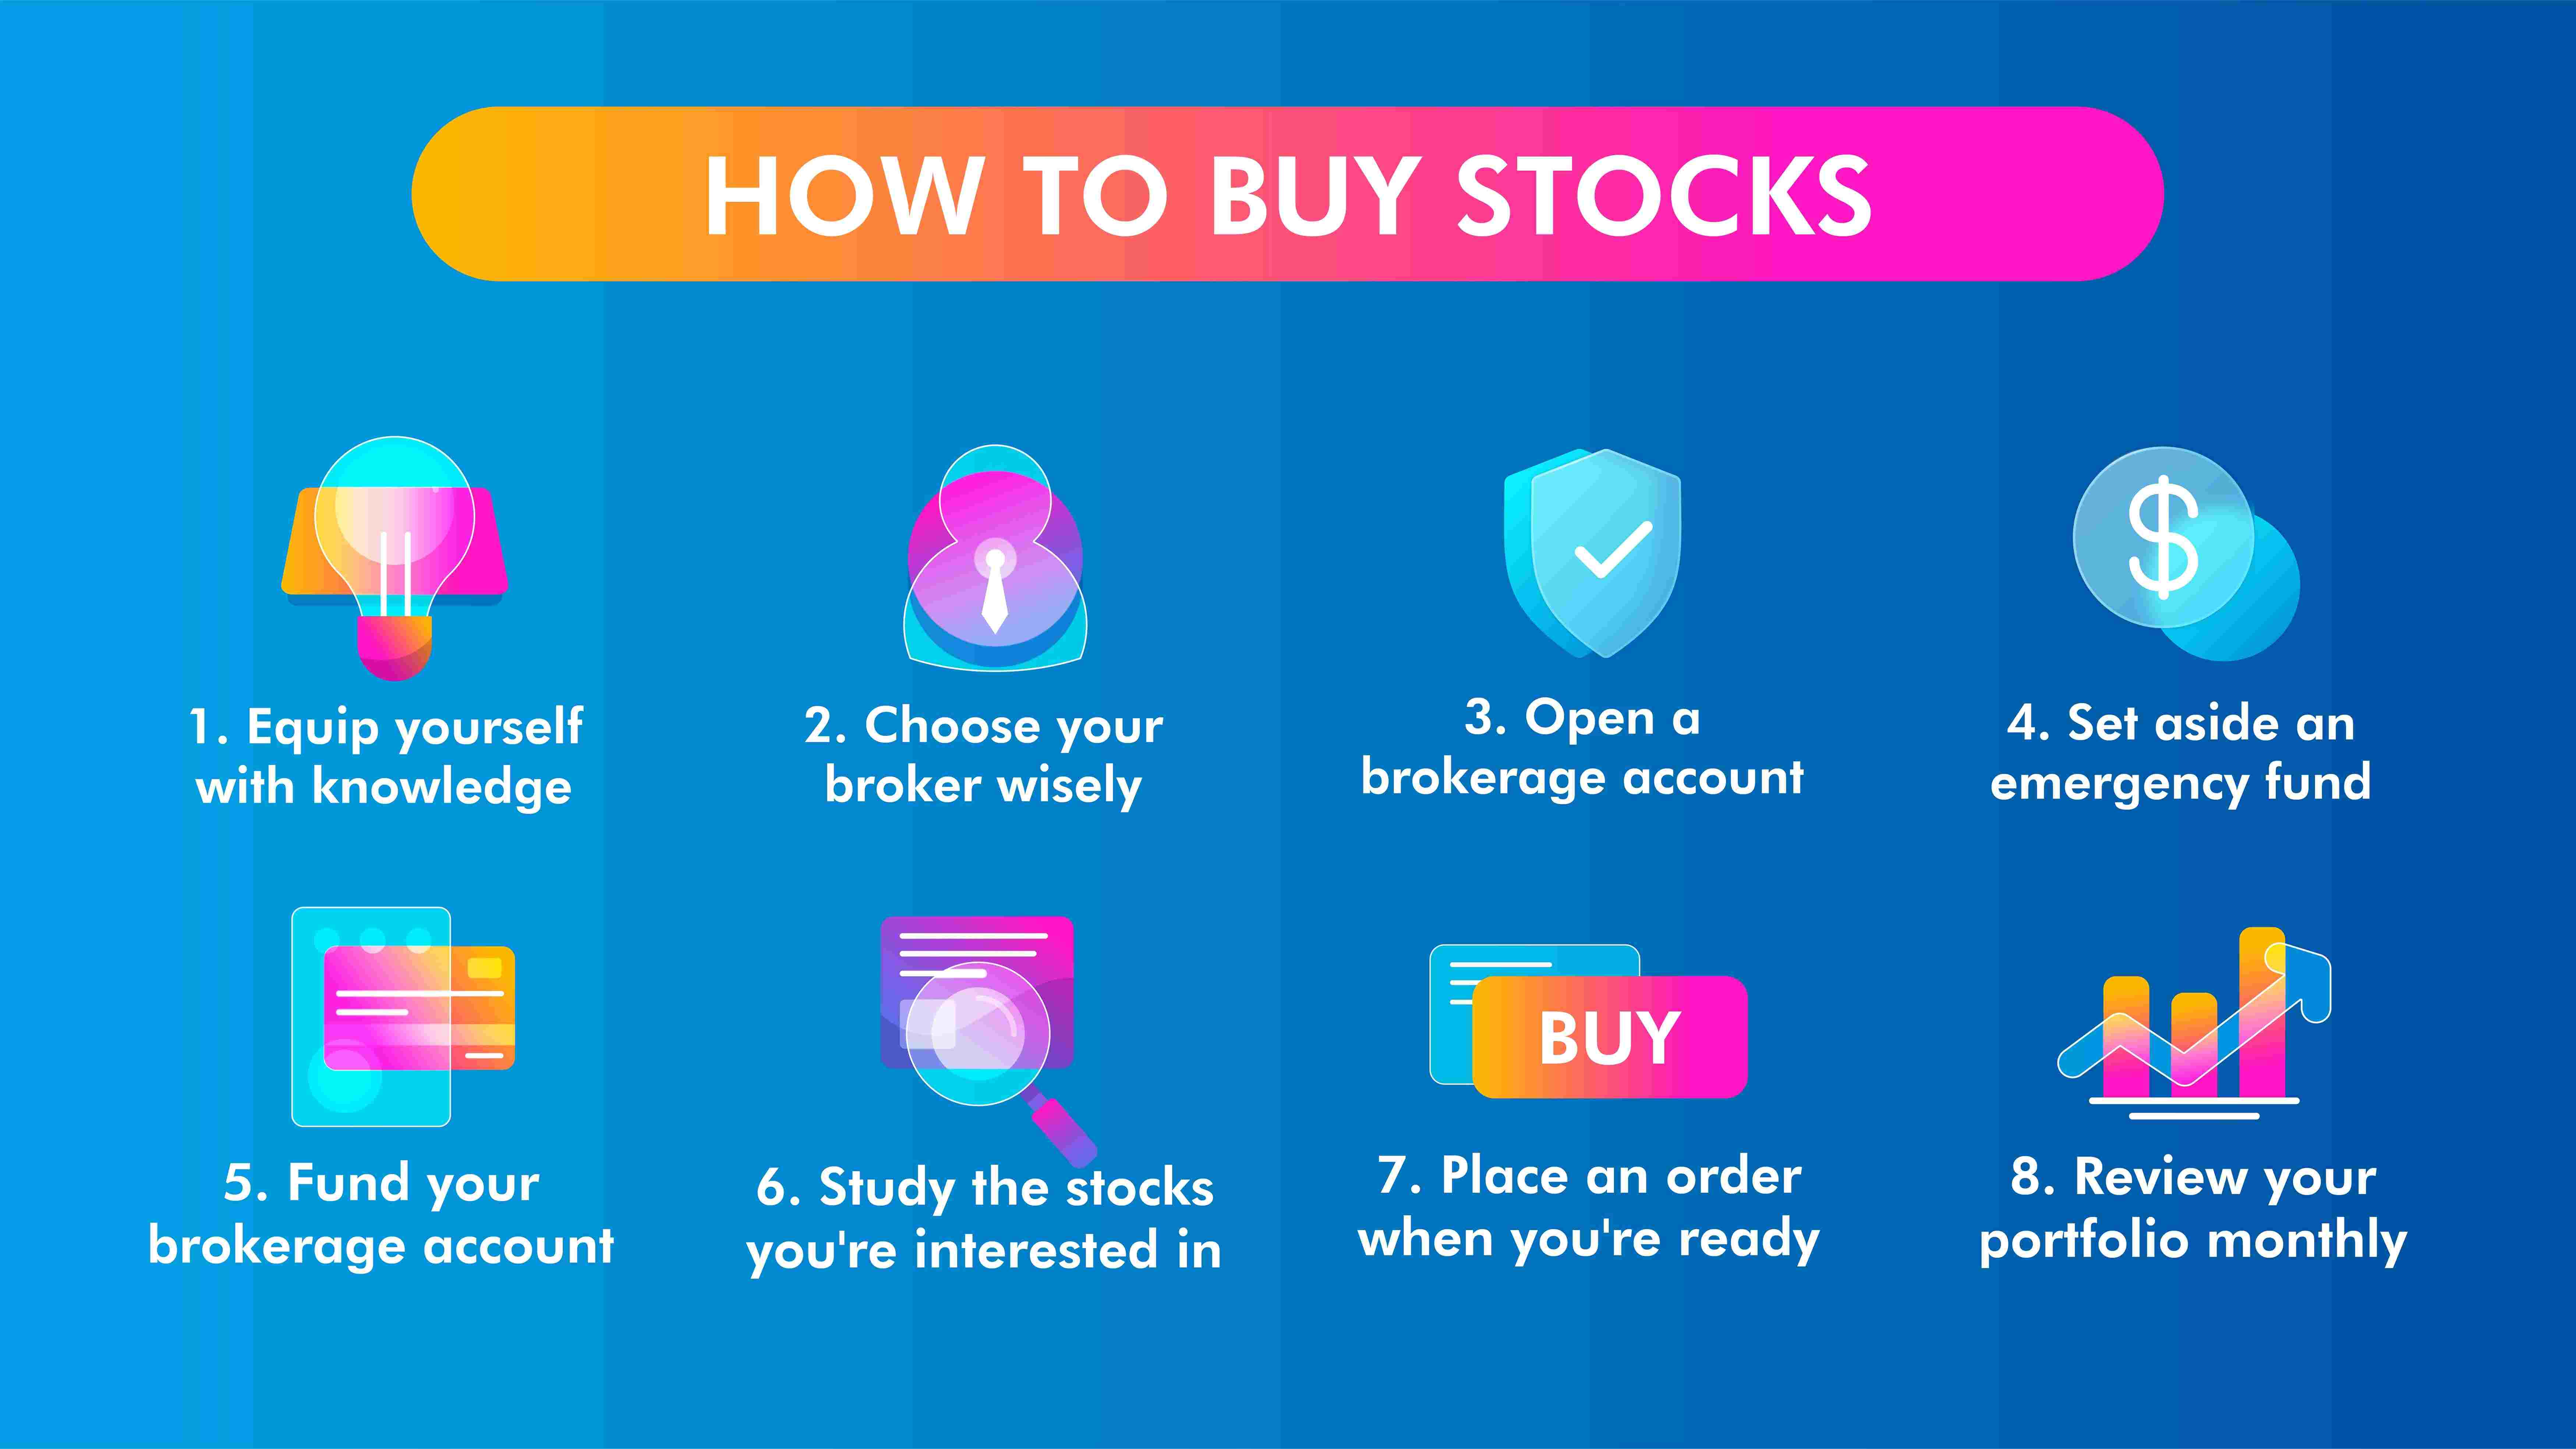 How to buy stocks in Singapore | VI College